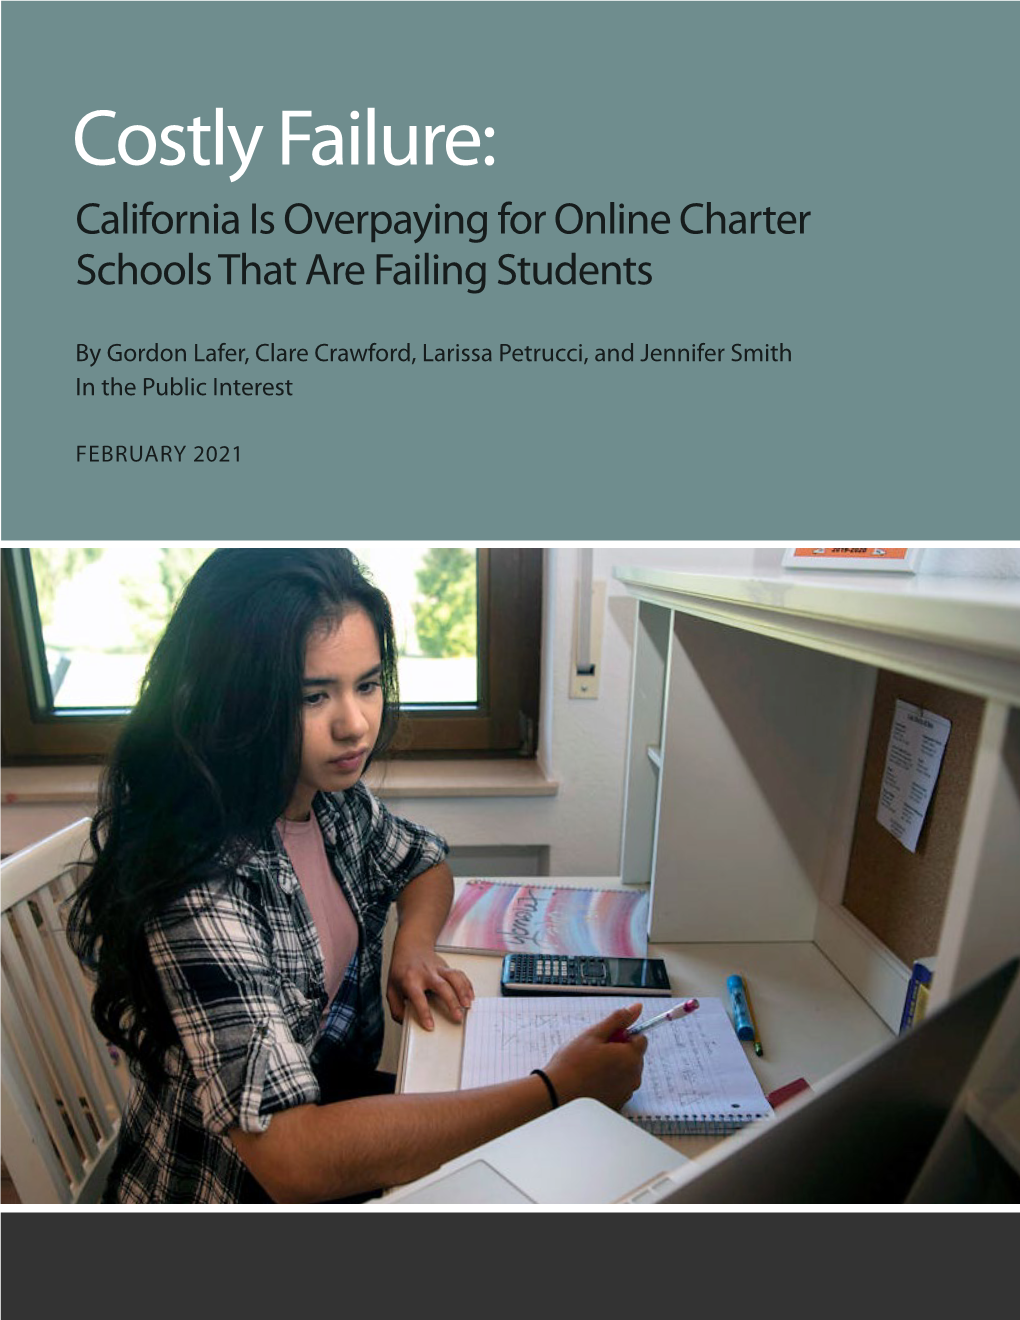 Costly Failure: California Is Overpaying for Online Charter Schools That Are Failing Students